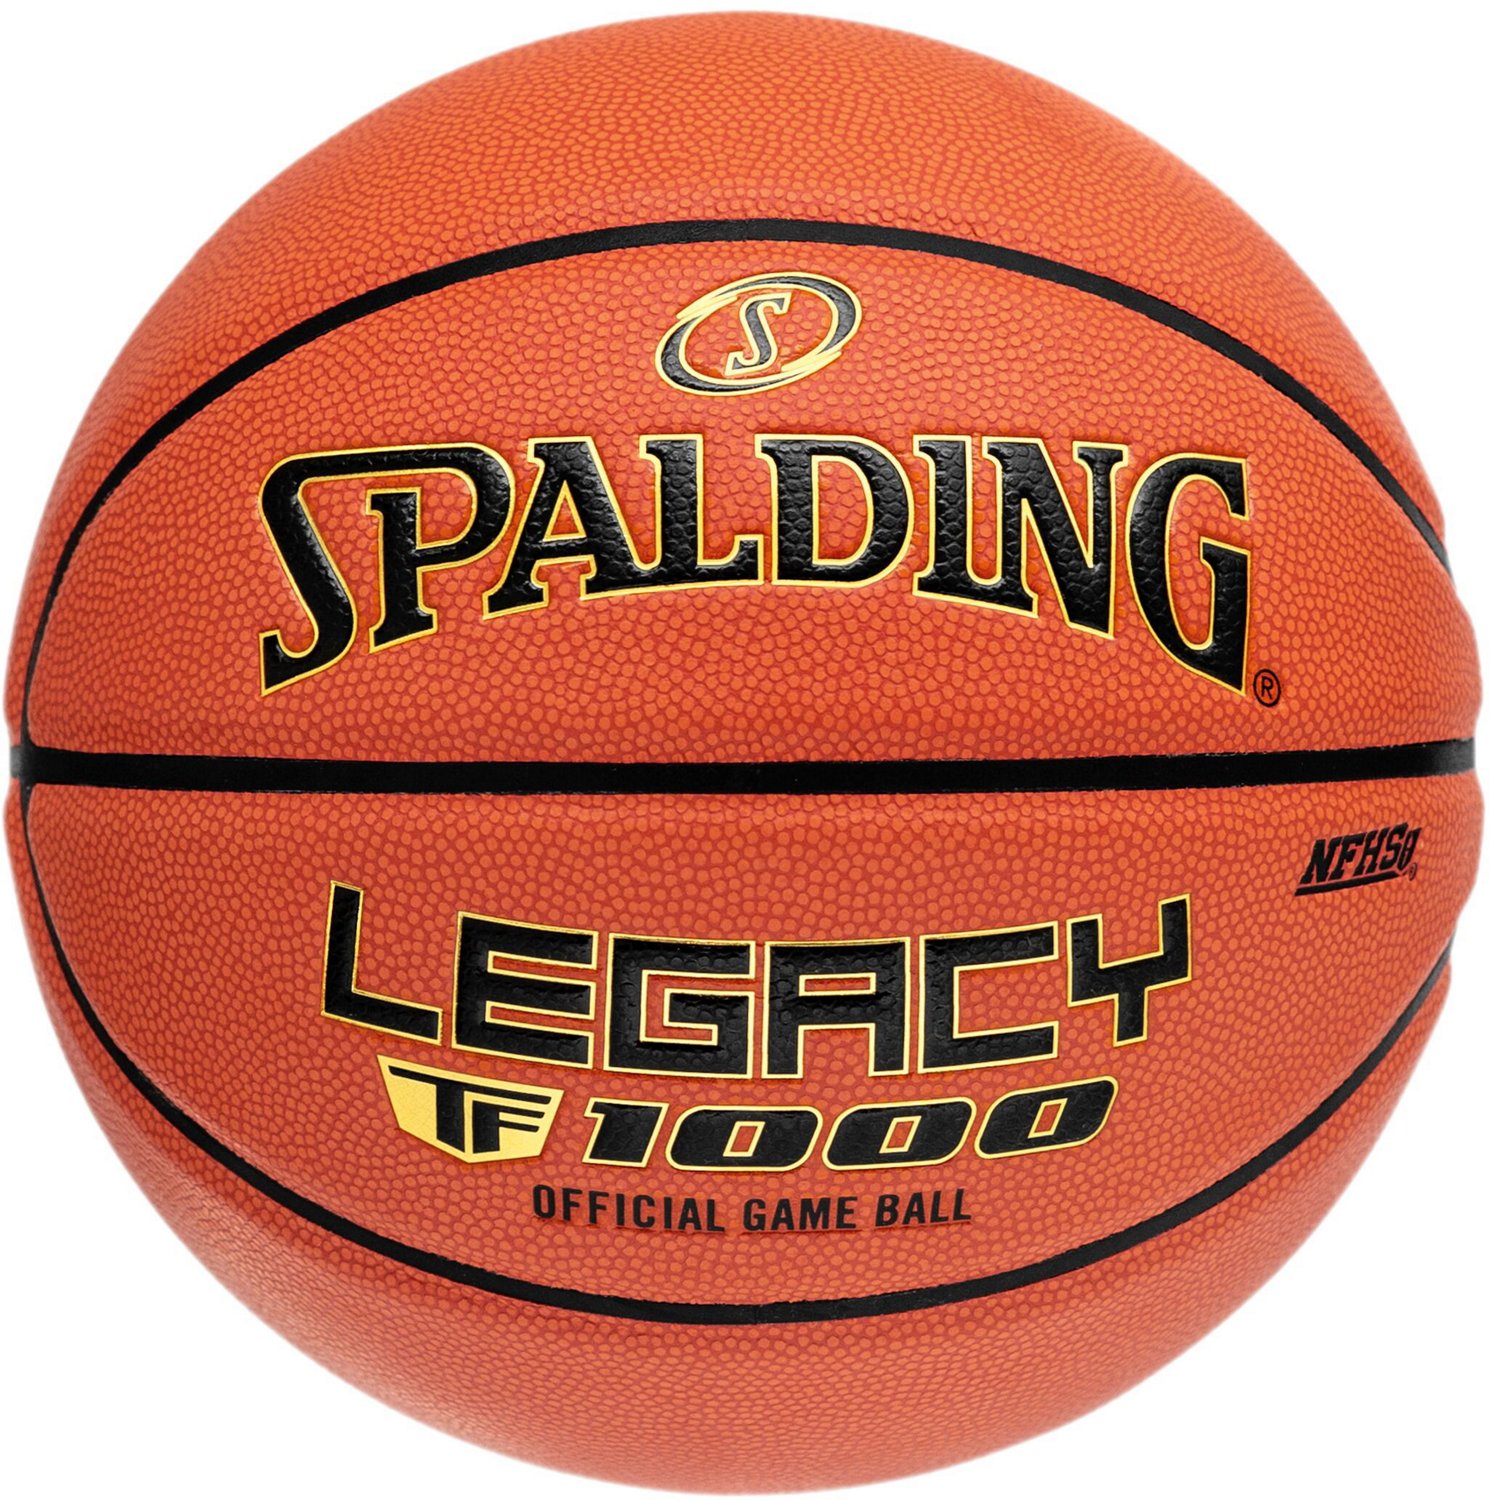 Spalding Legacy TF-1000 29.5 in Basketball